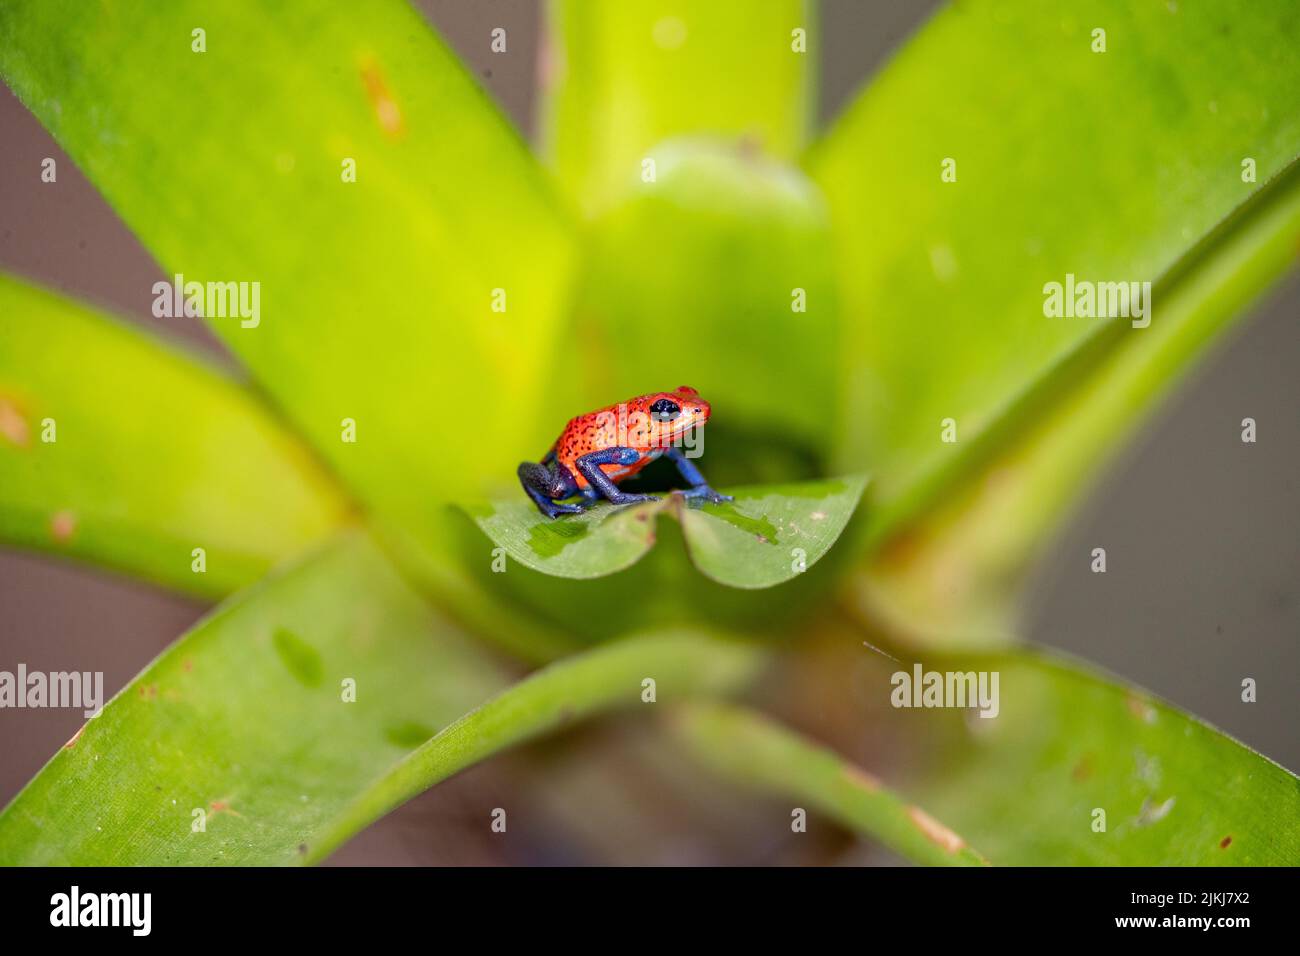 A strawberry poison dart frog perched on a plant leaf in Costa Rica Stock Photo